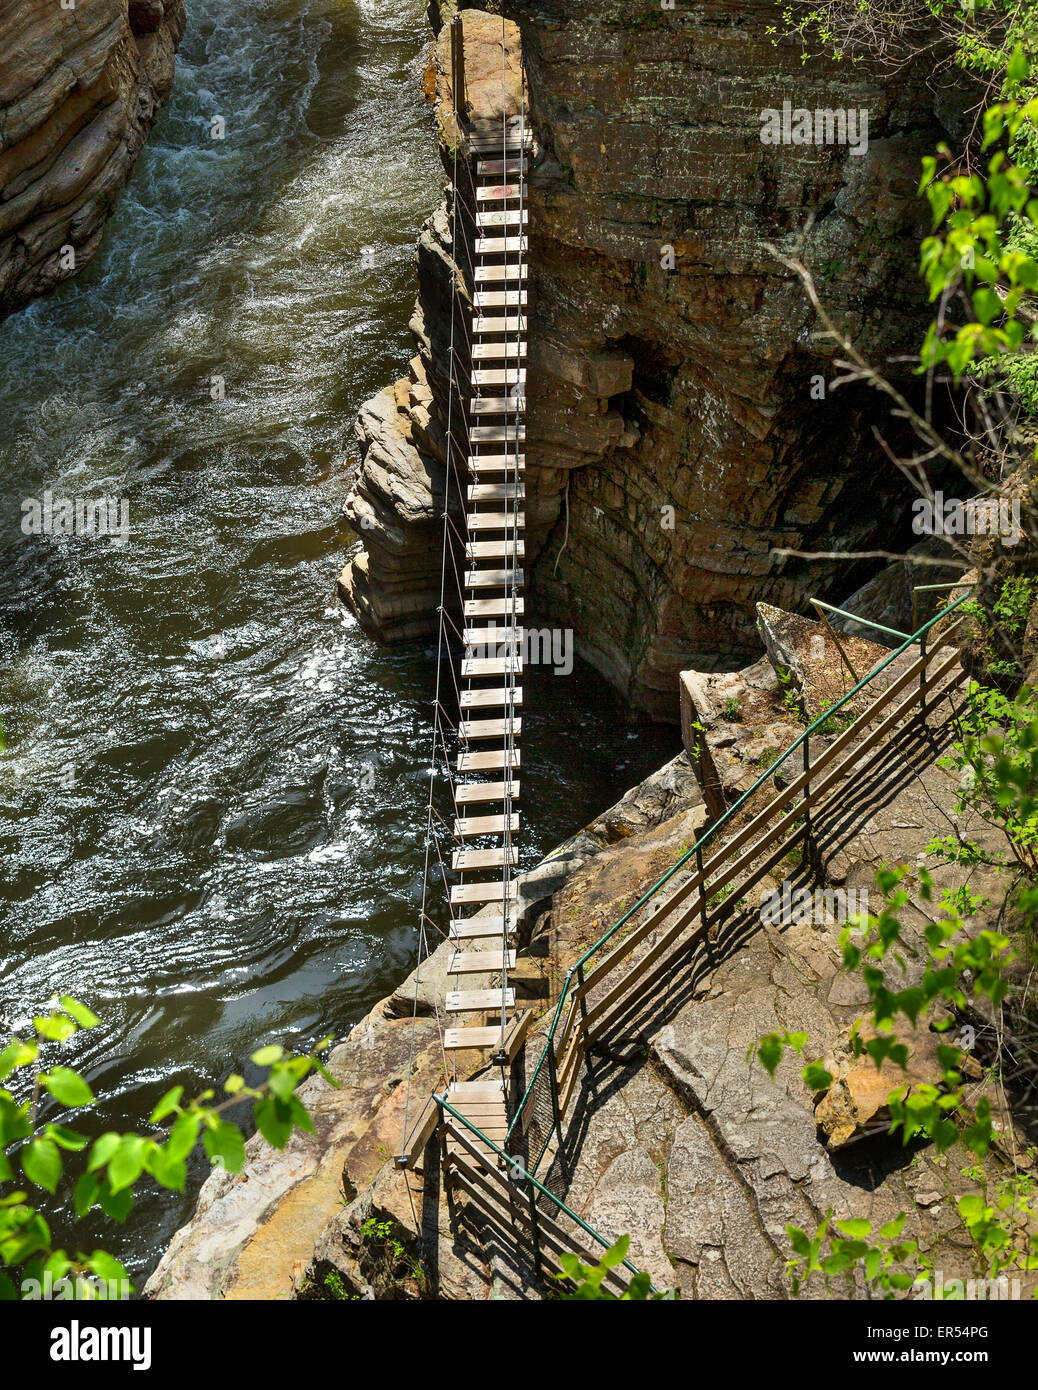 Suspended bridge over the Ausable river in Keeseville, Upstate New York. Stock Photo